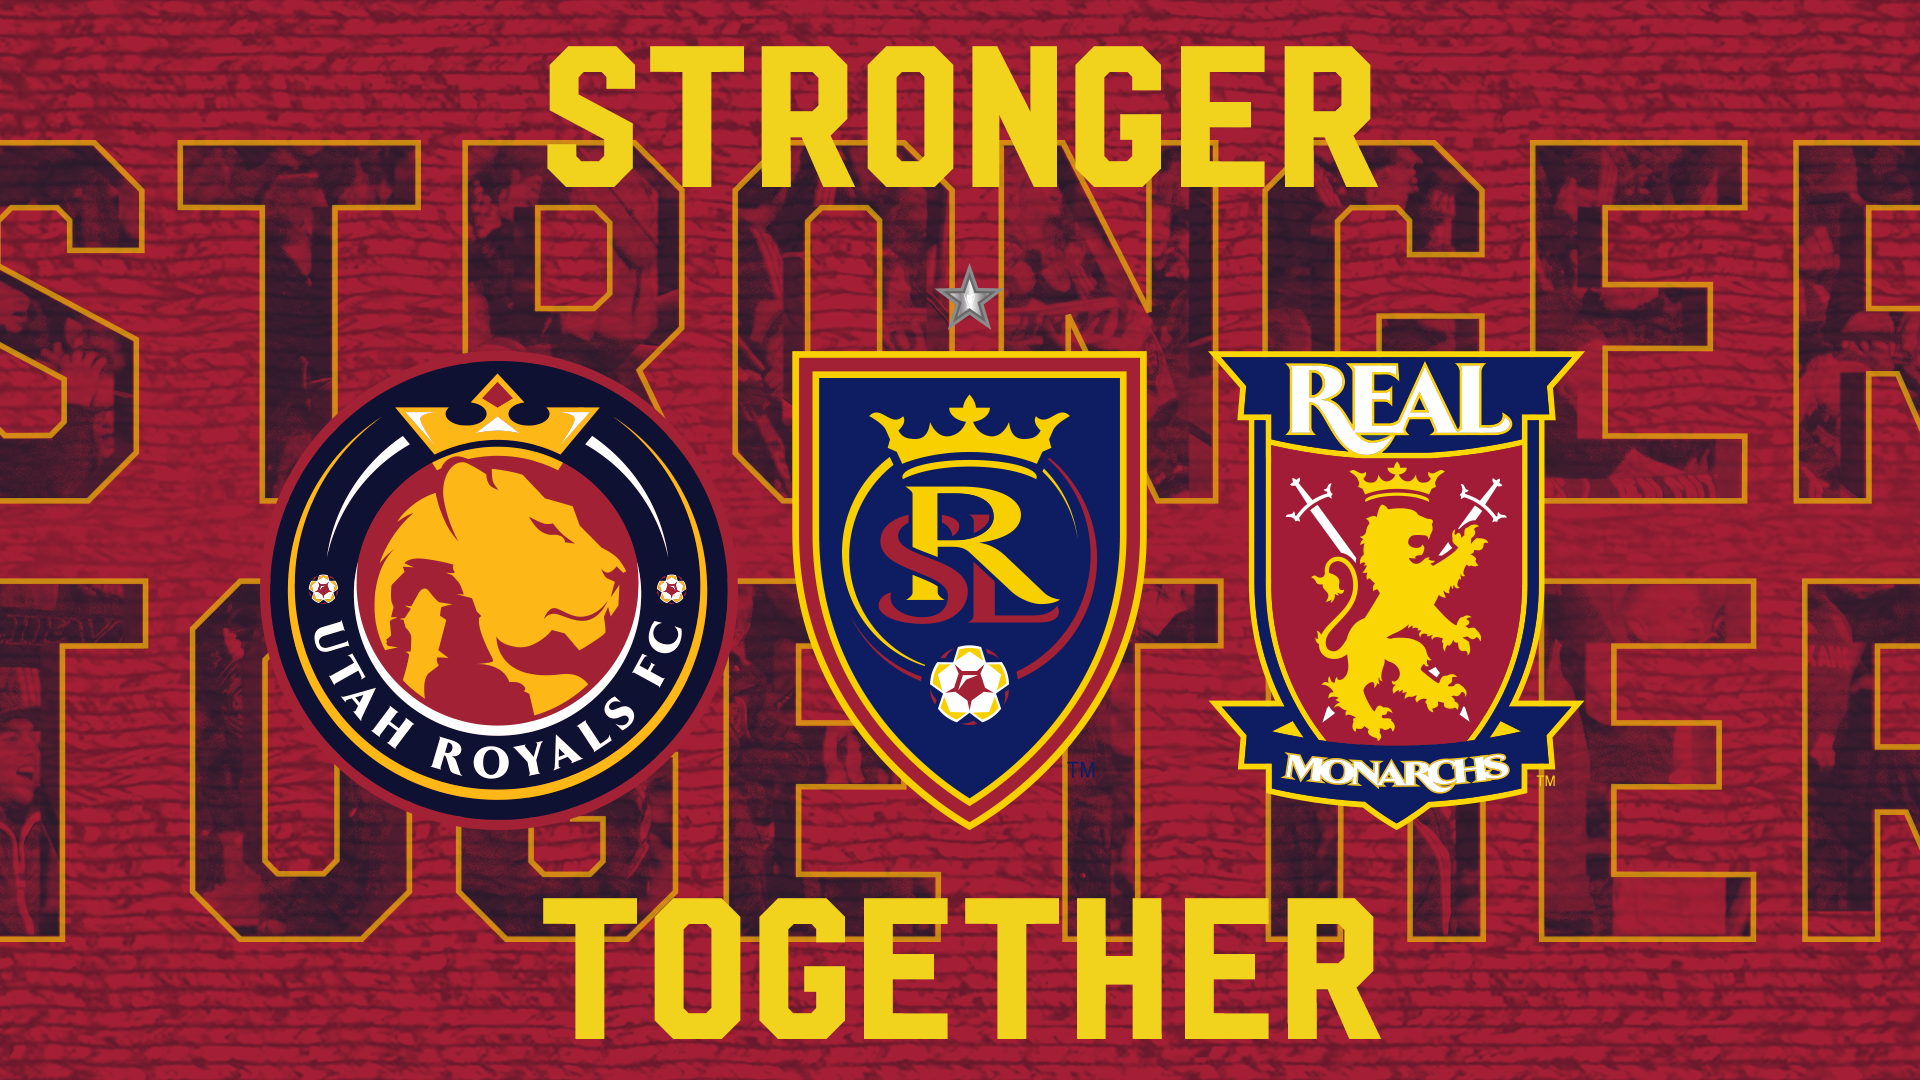 Real Salt Lake Announces Strongertogether Campaign For